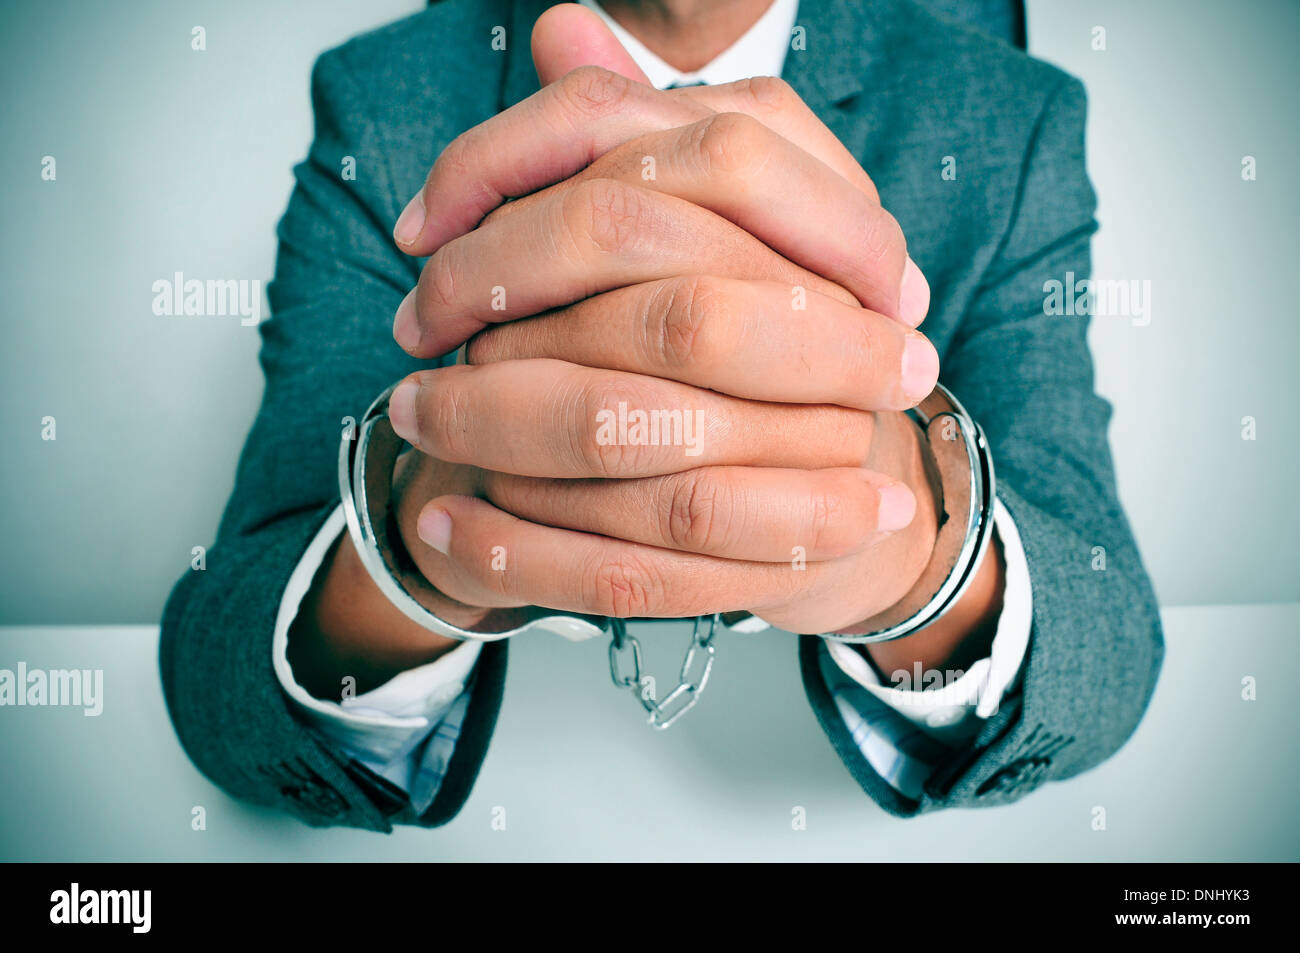 a man wearing a suit sitting in a desk, with handcuffs in his wrists Stock Photo